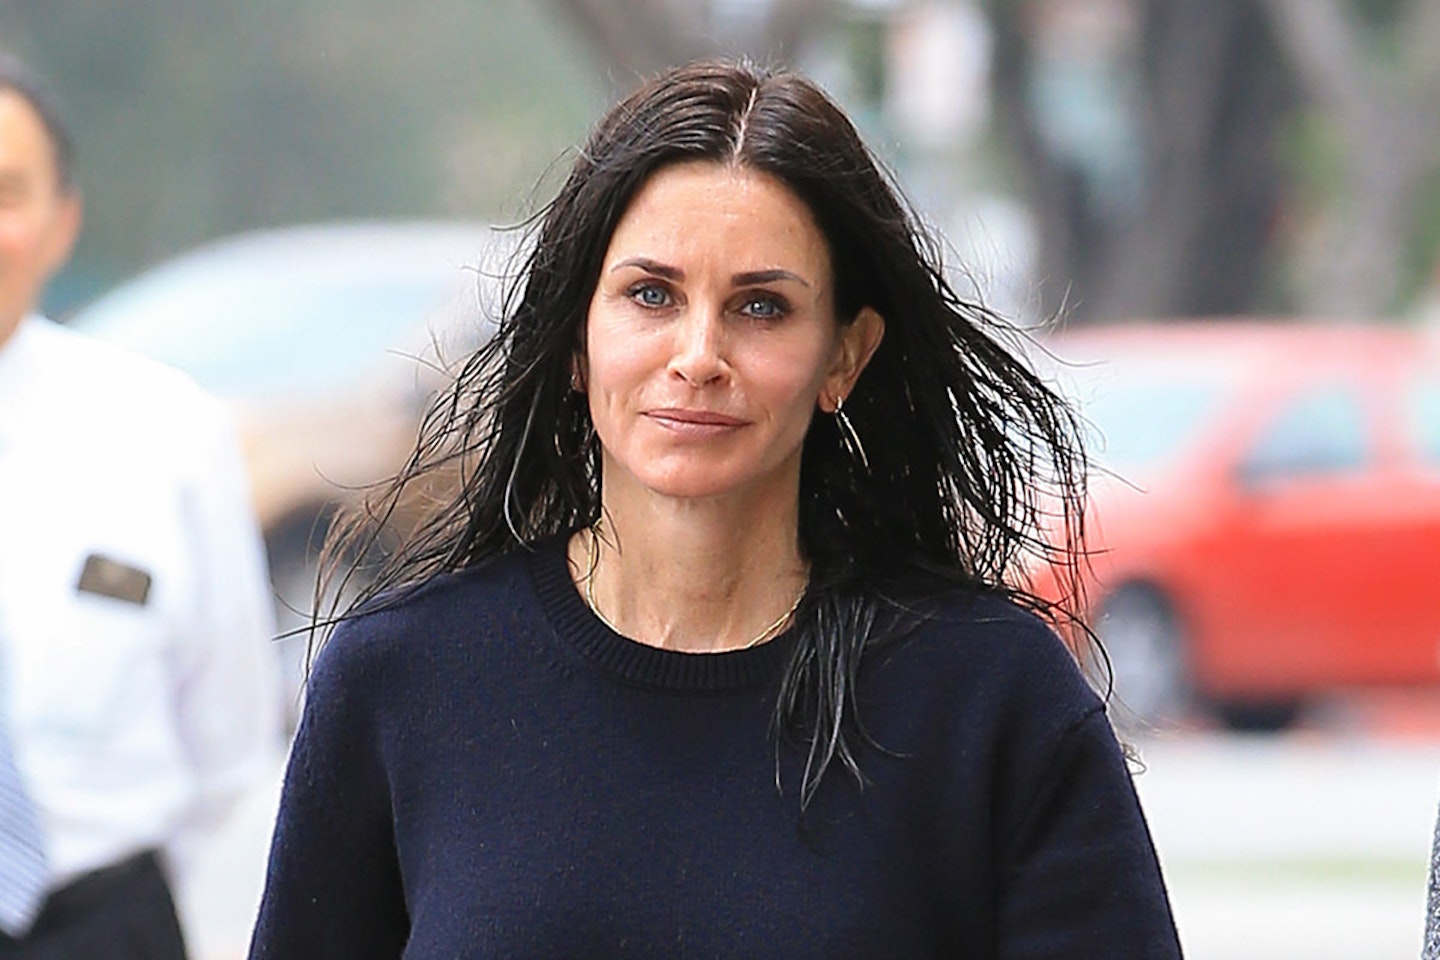 courteney-cox-fillers-dissolved-plastic-surgery